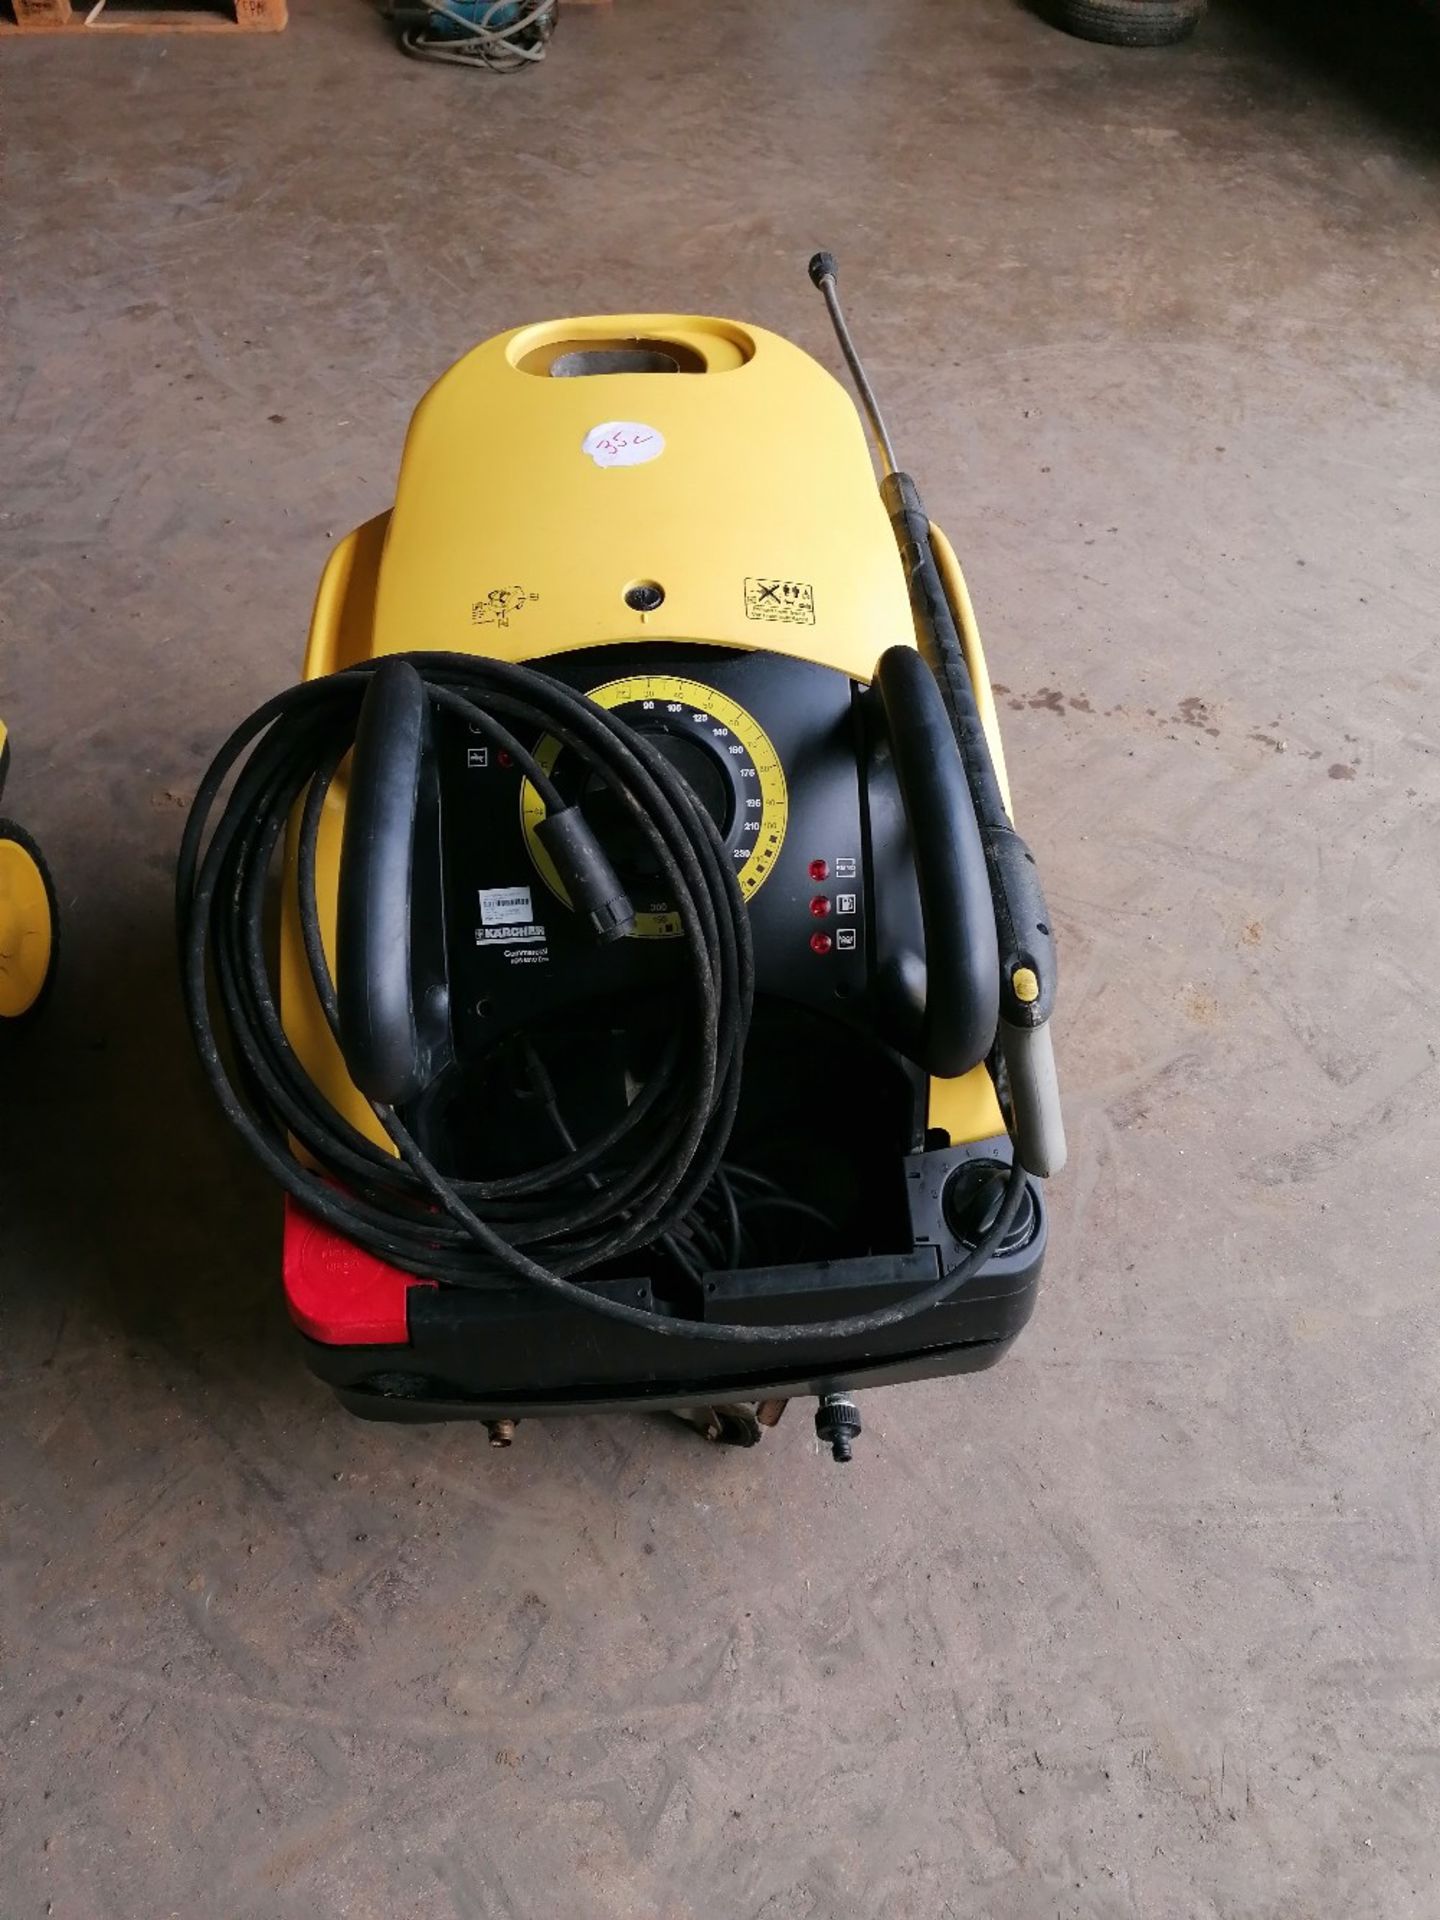 Karcher HDS 601 C Hot water pressure washer. No VAT on this item.